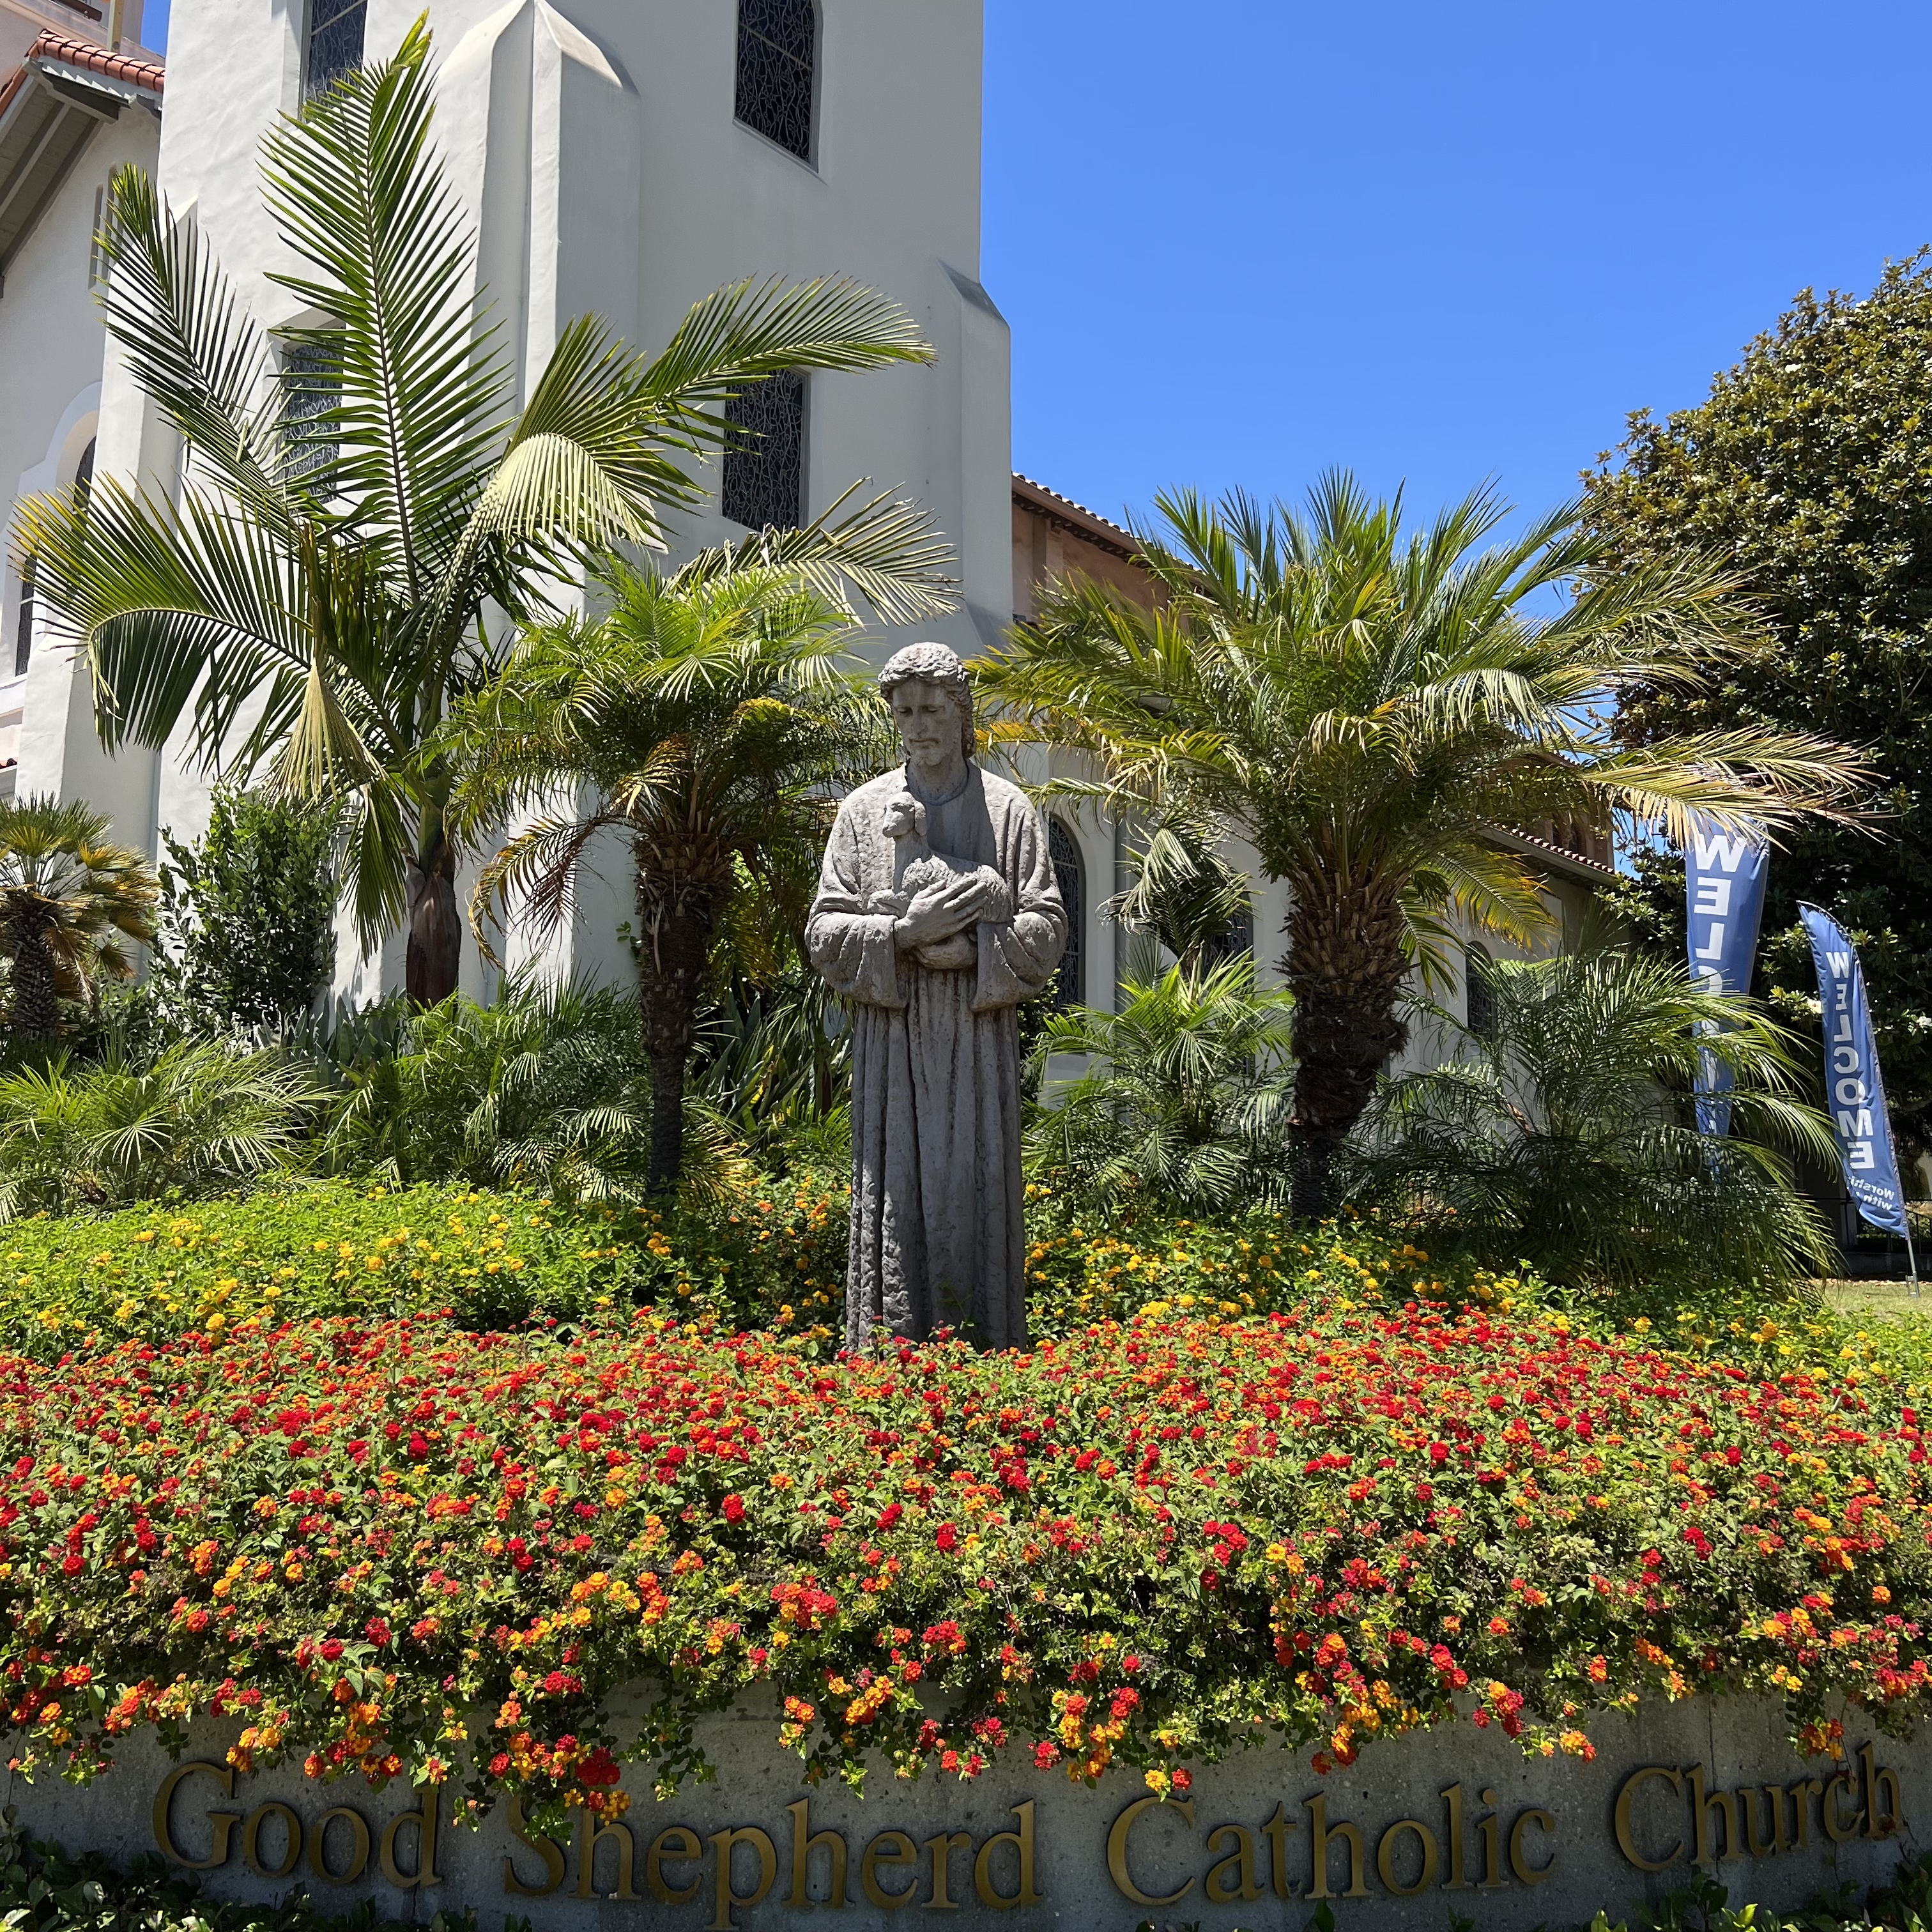 A church and a statue surrounded by plants